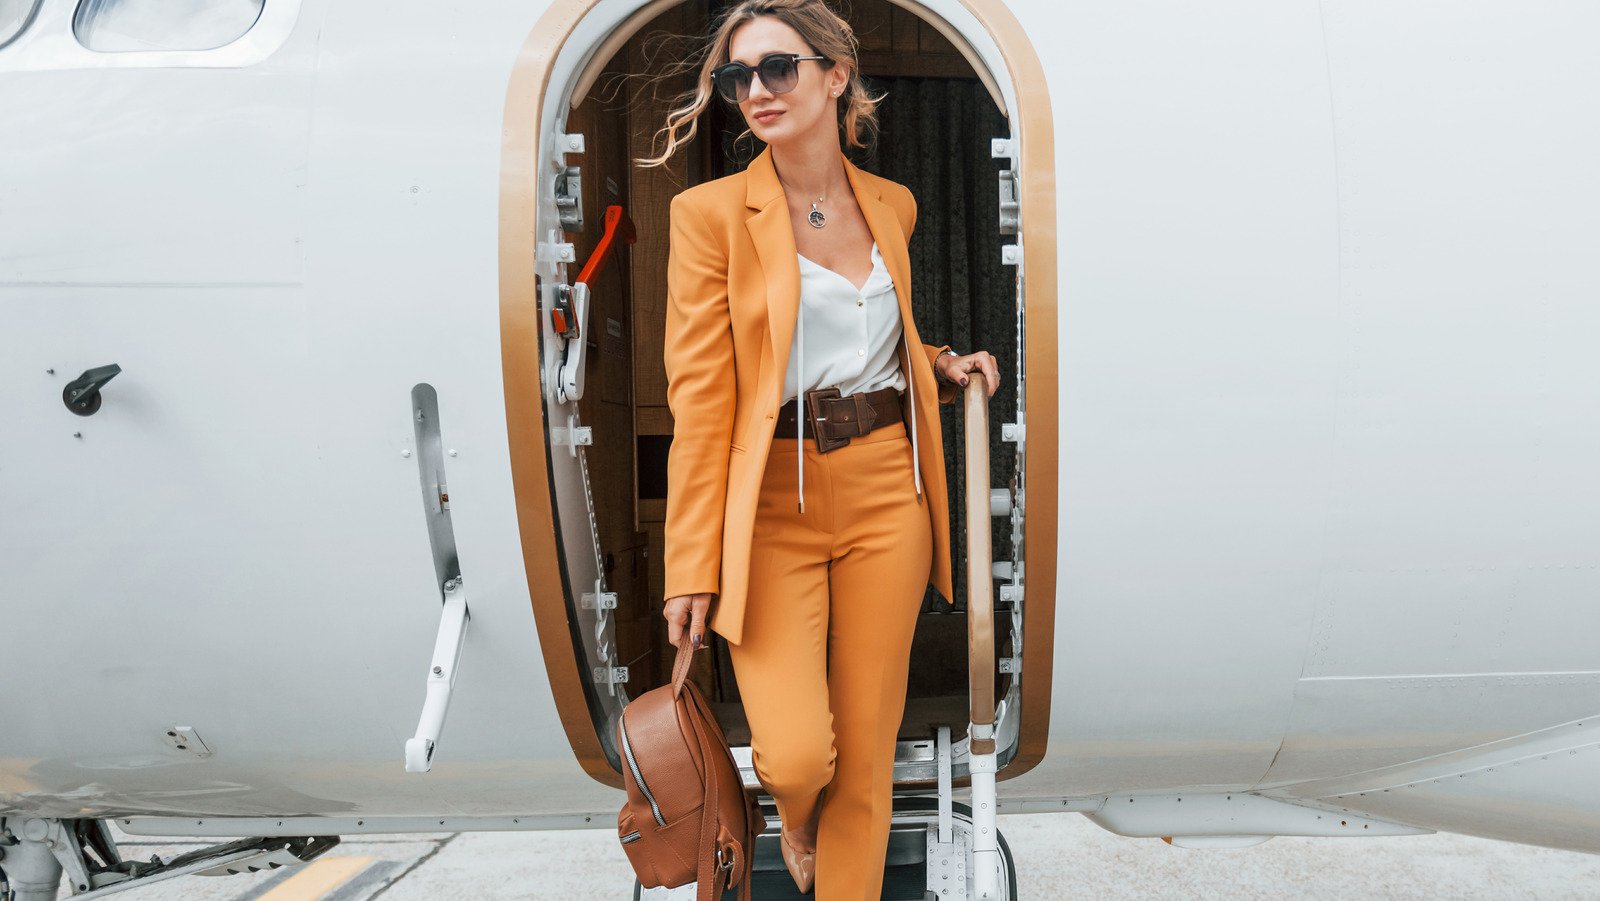 Clothing Items You Should Avoid Wearing On An Airplane - Glam